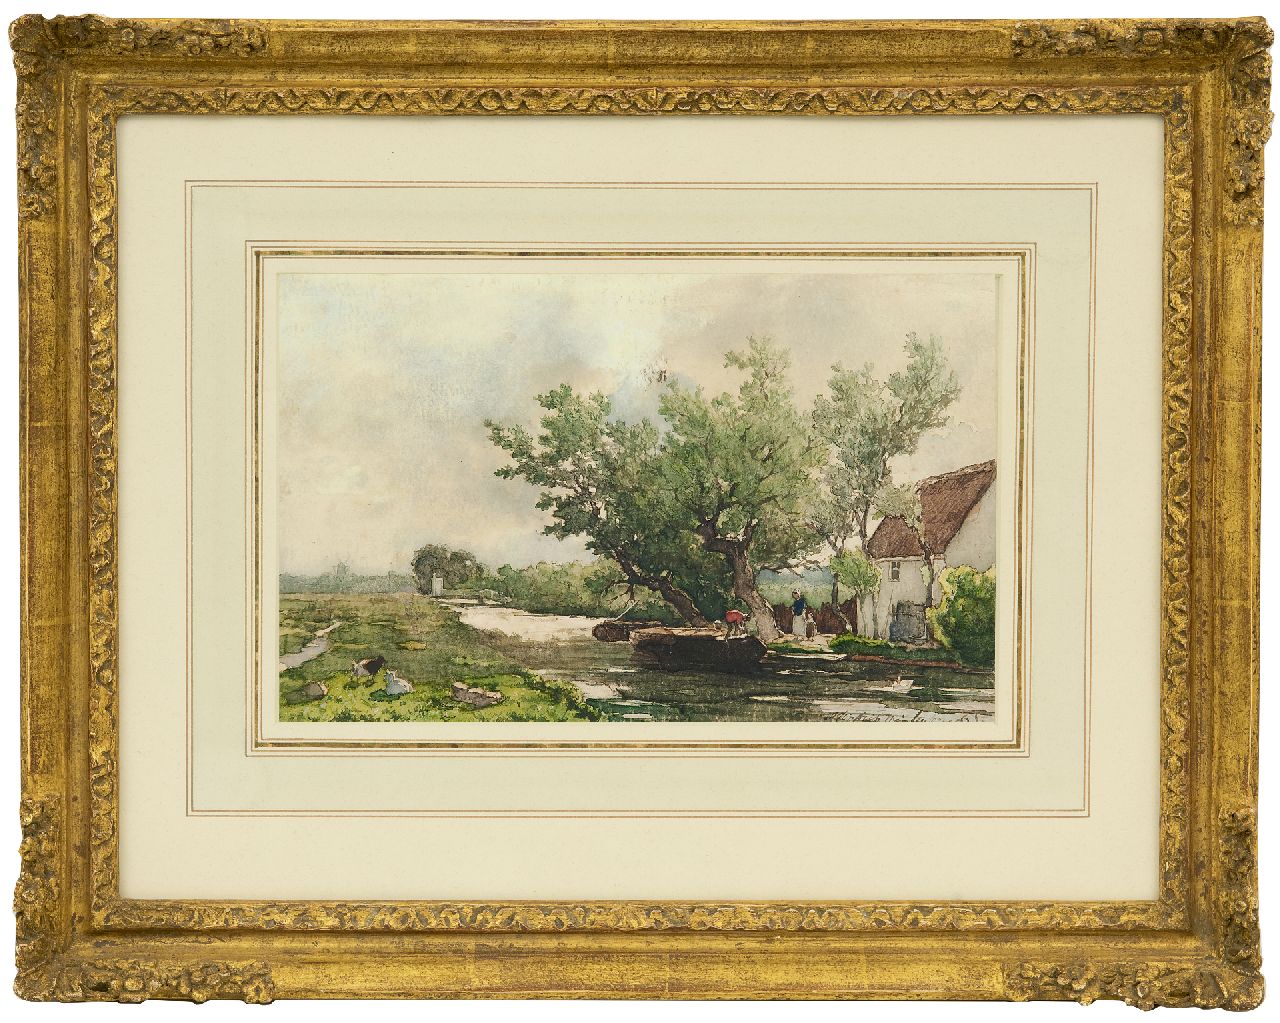 Weissenbruch H.J.  | Hendrik Johannes 'J.H.' Weissenbruch | Watercolours and drawings offered for sale | Canal along the Benoordenhoutseweg near The Hague, watercolour on paper 17.6 x 28.1 cm, signed l.r.